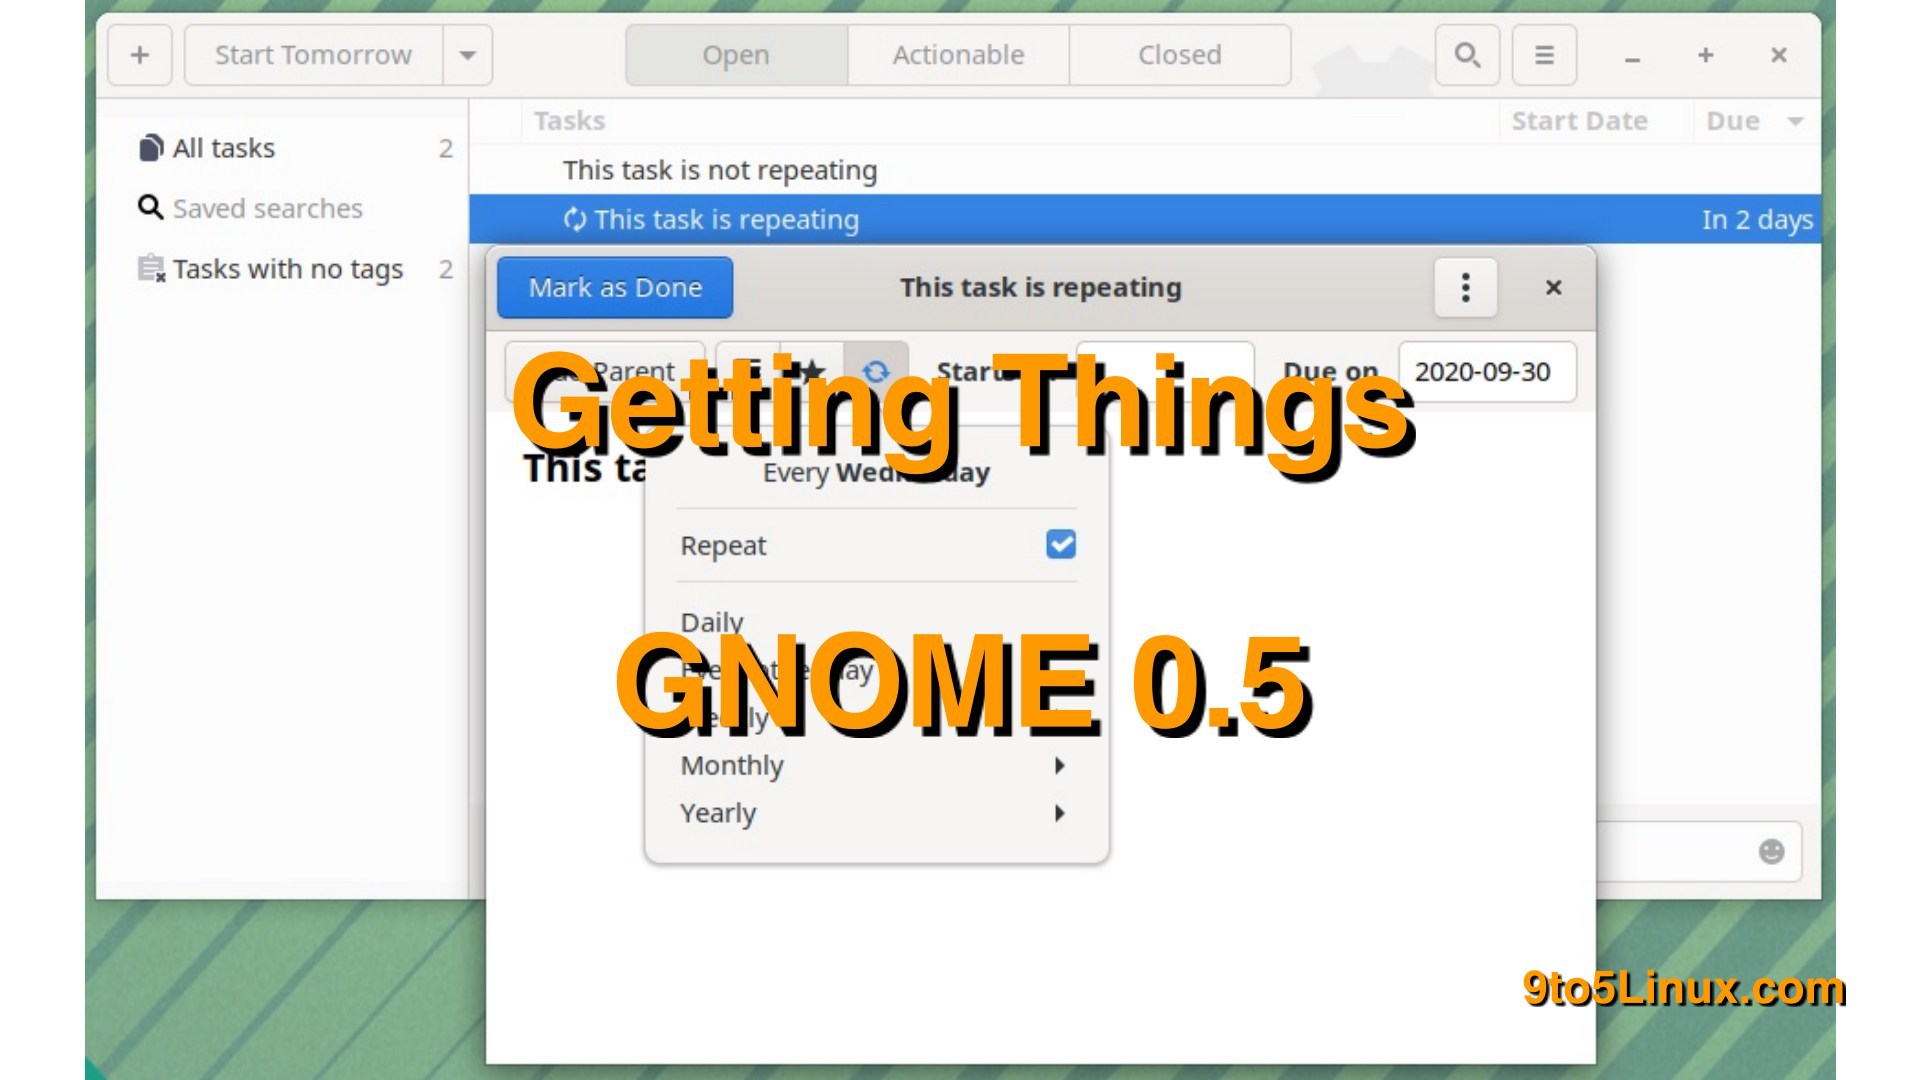 Getting Things GNOME 0.5 To-Do App Released with Recurring Tasks, Performance Improvements